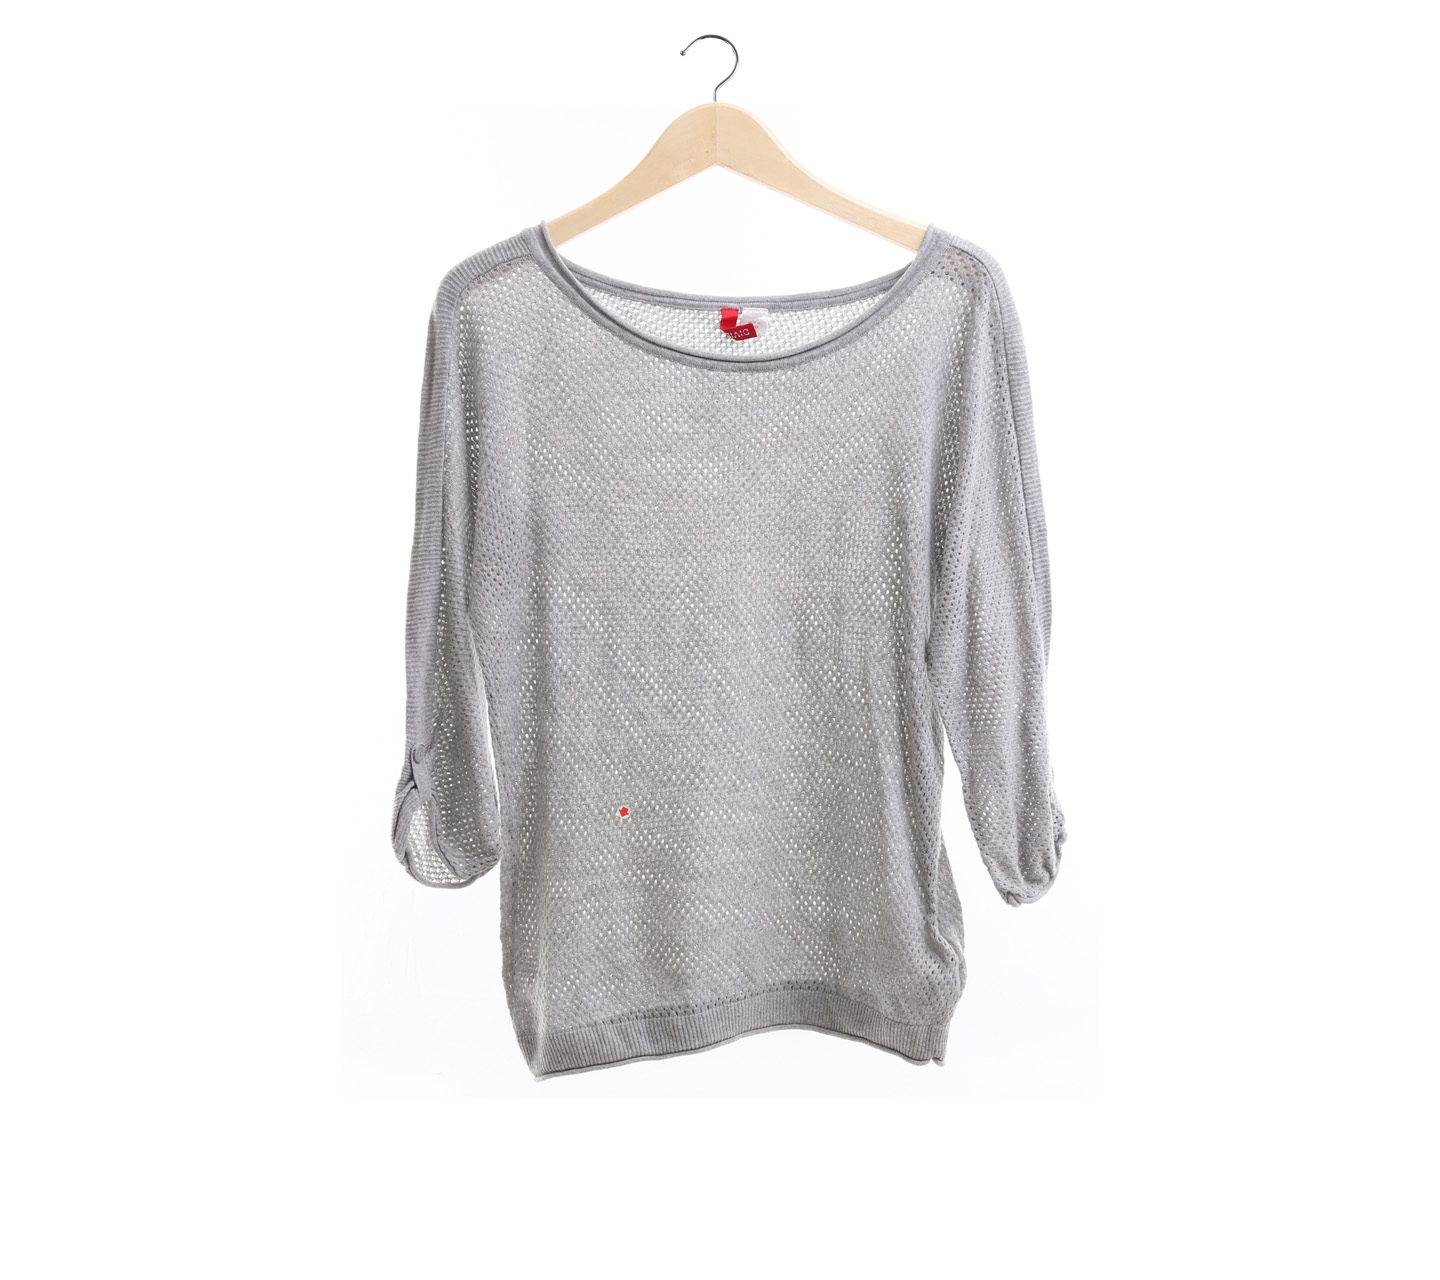 H&M Grey Perforated Sweater